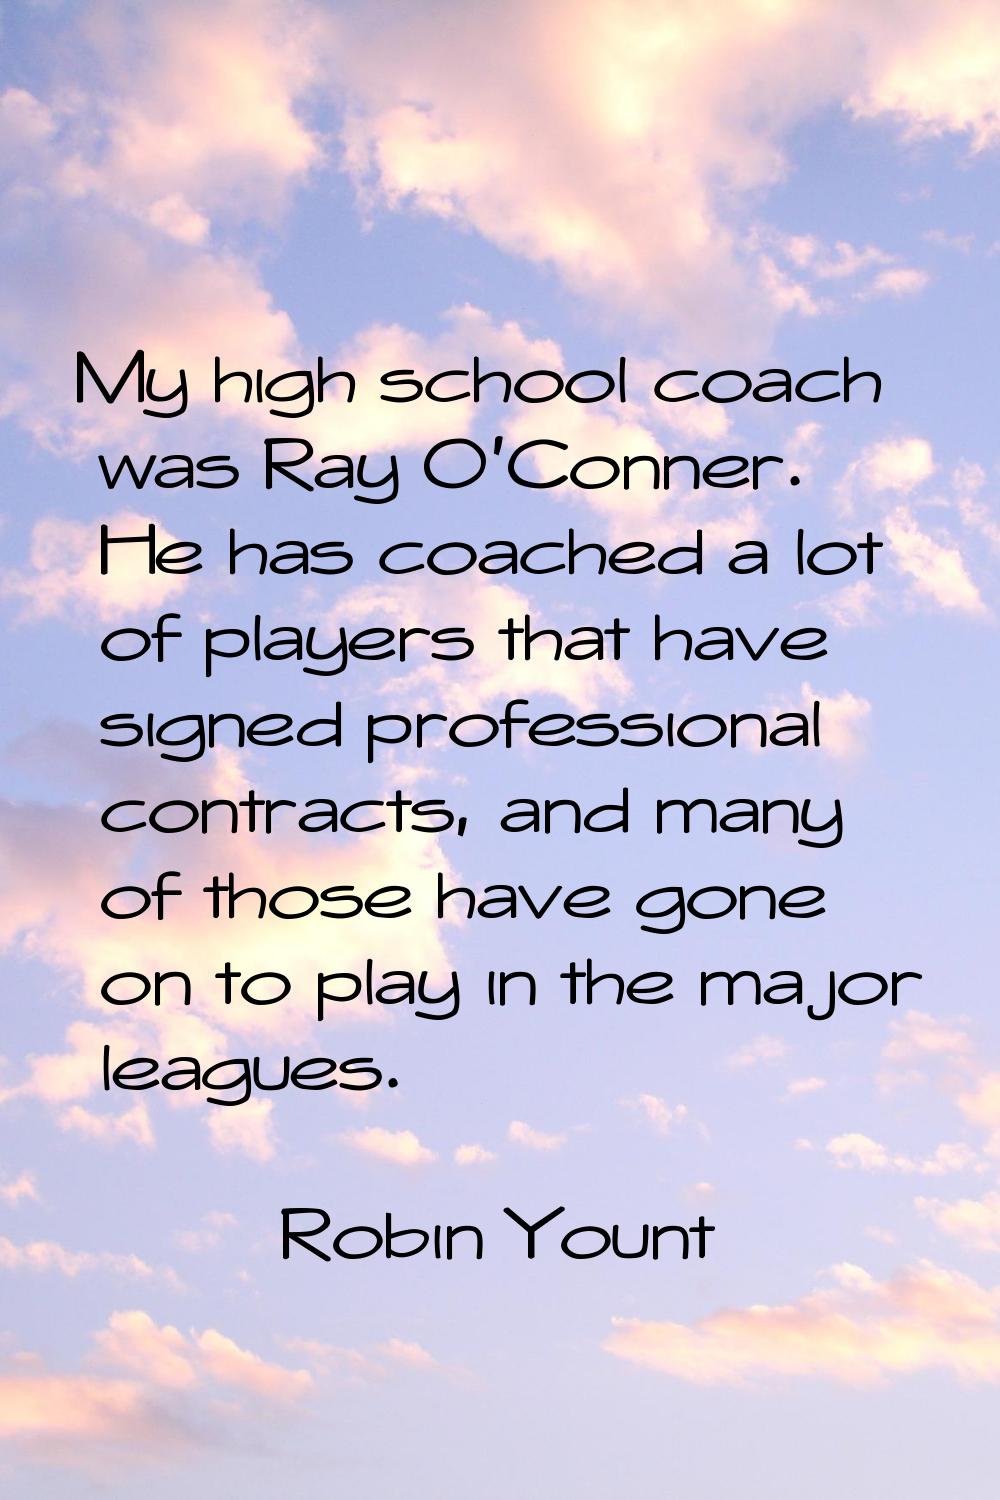 My high school coach was Ray O'Conner. He has coached a lot of players that have signed professiona